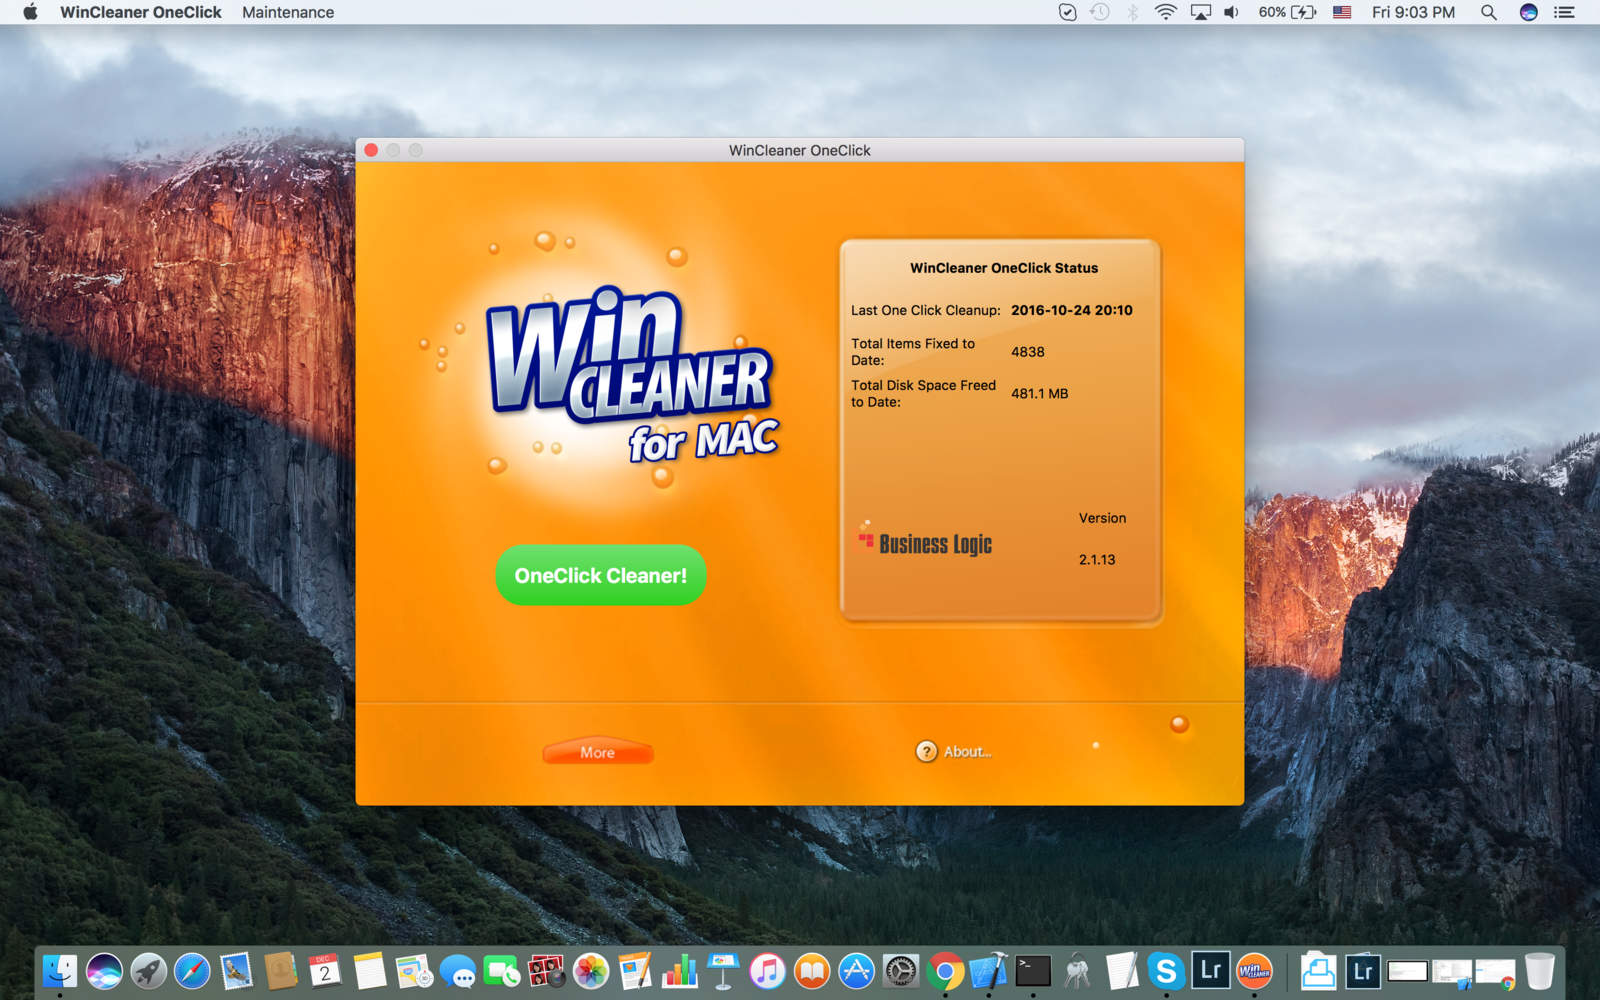 WinCleaner OneClick 2.1 : Main Window